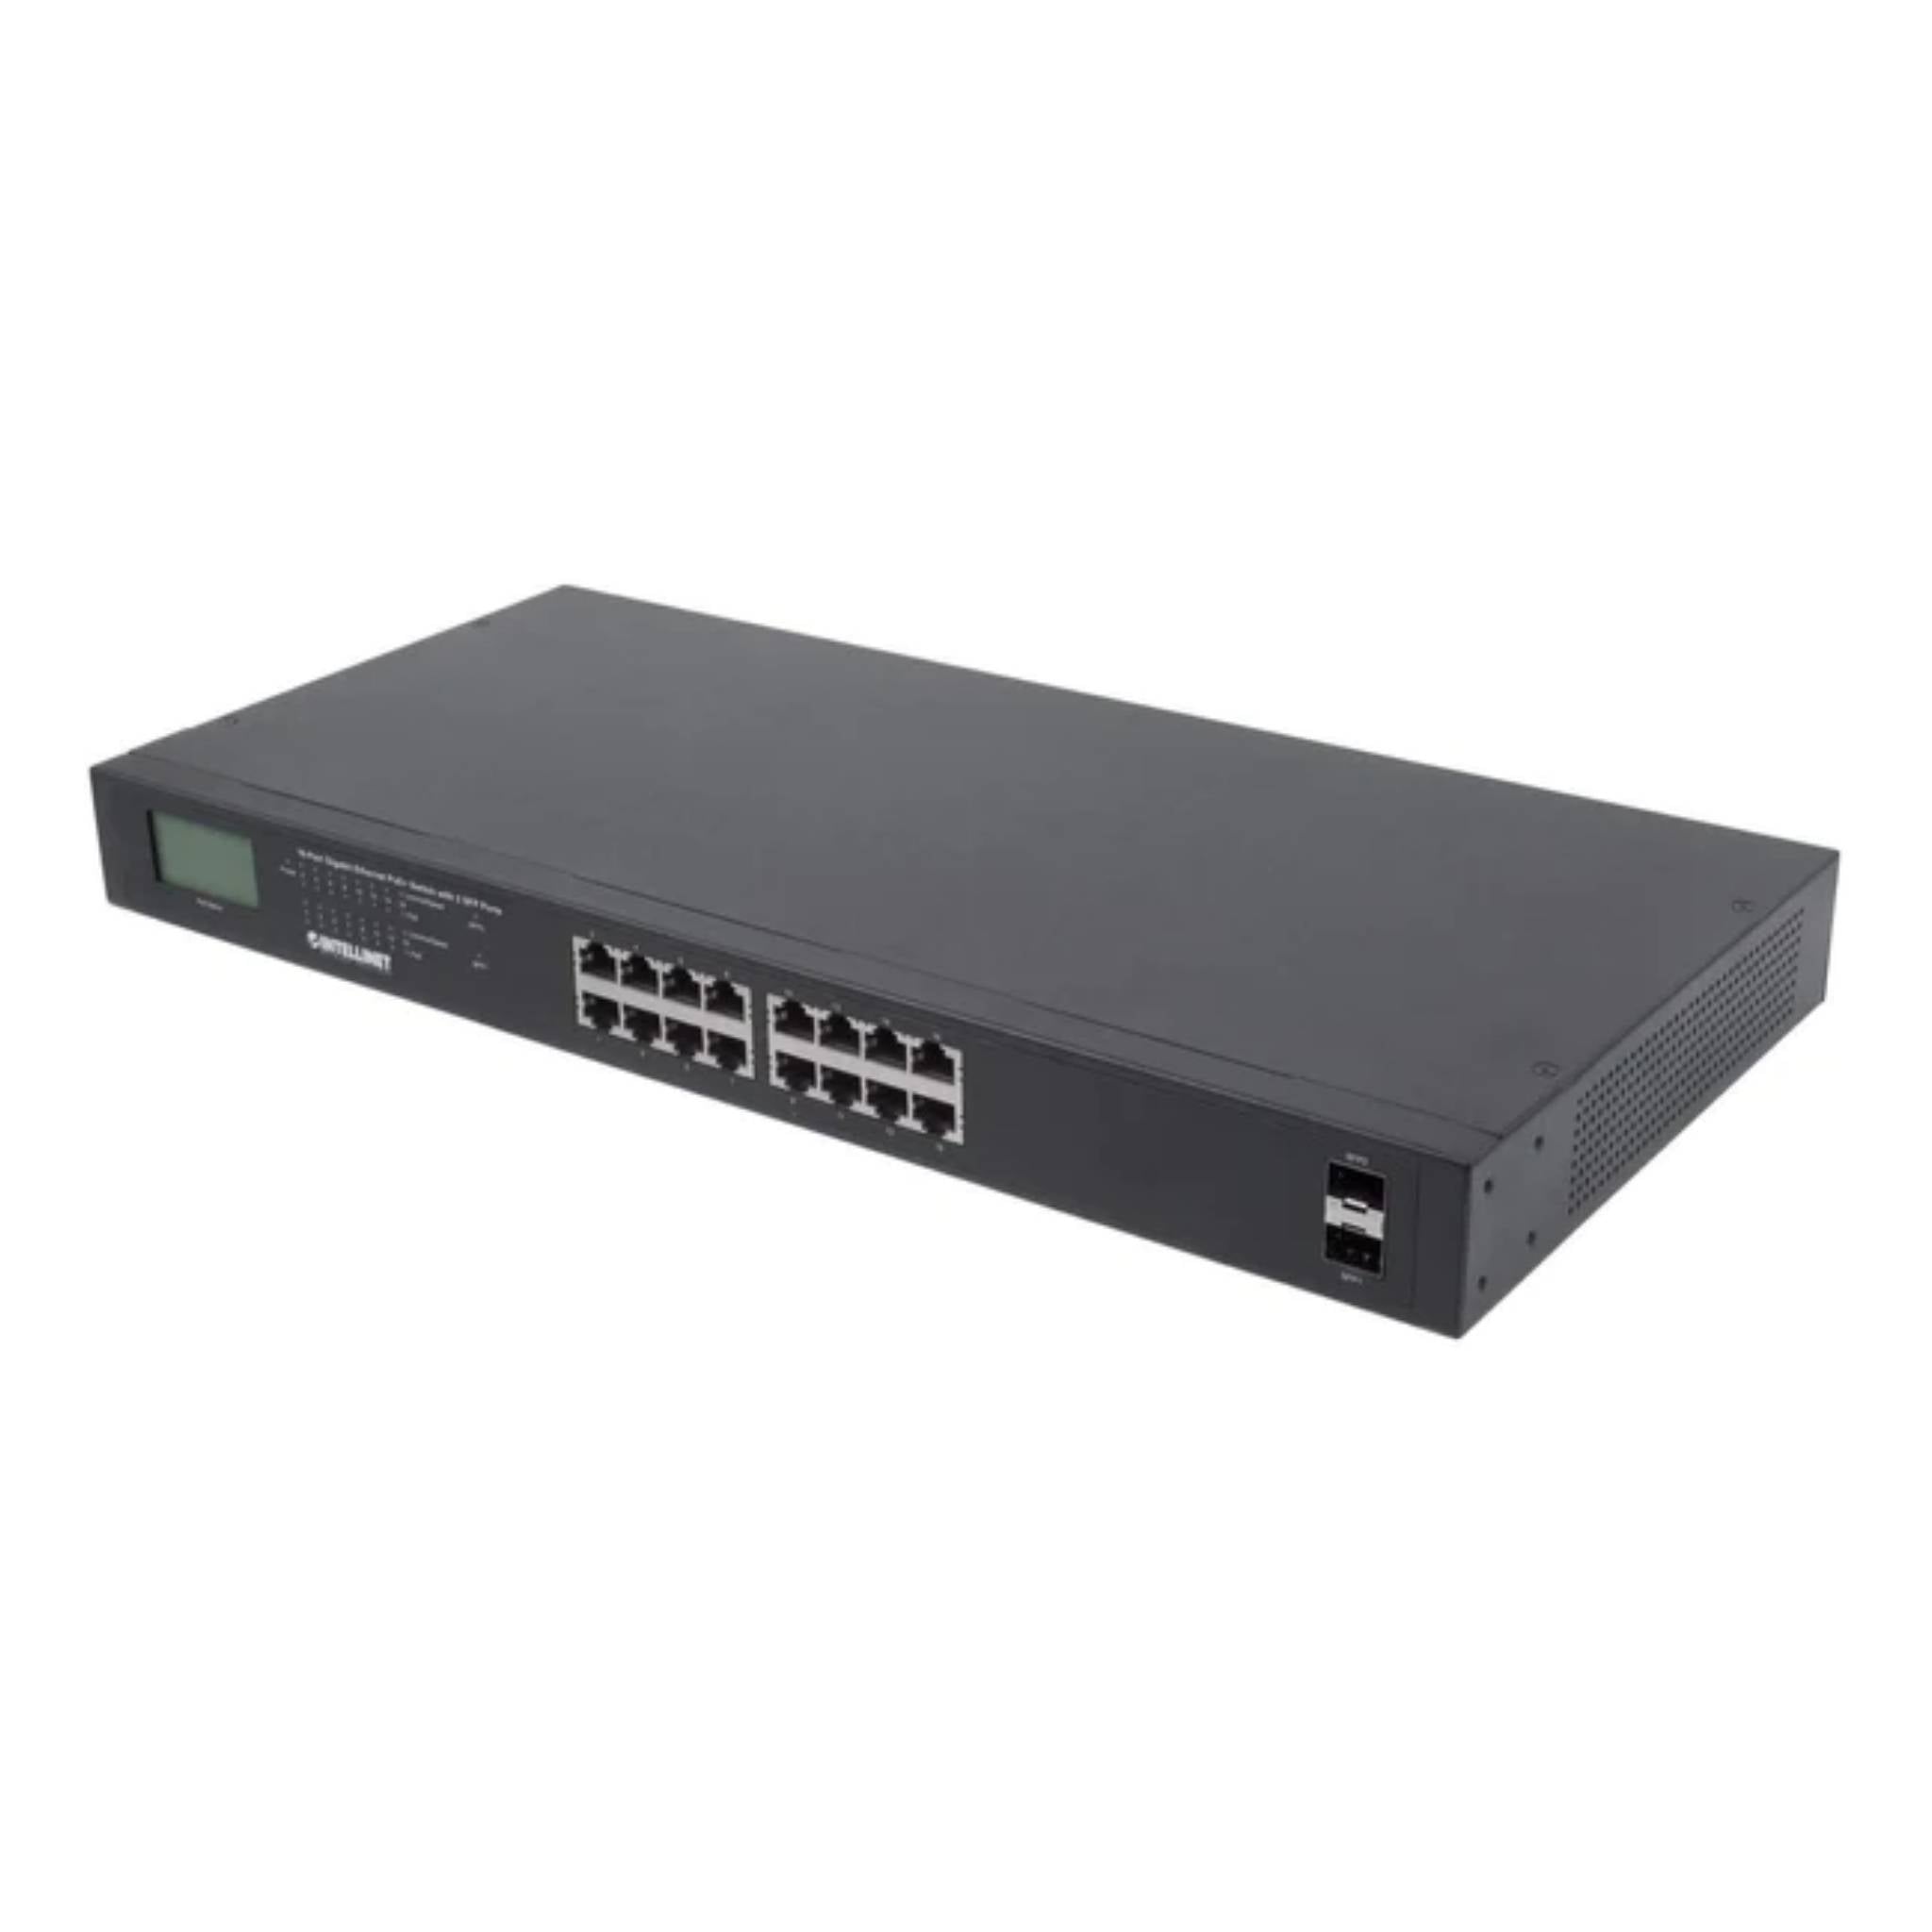 16-Port Gigabit Ethernet PoE+ Switch with 2 SFP Ports and LCD Screen Rack Mountable